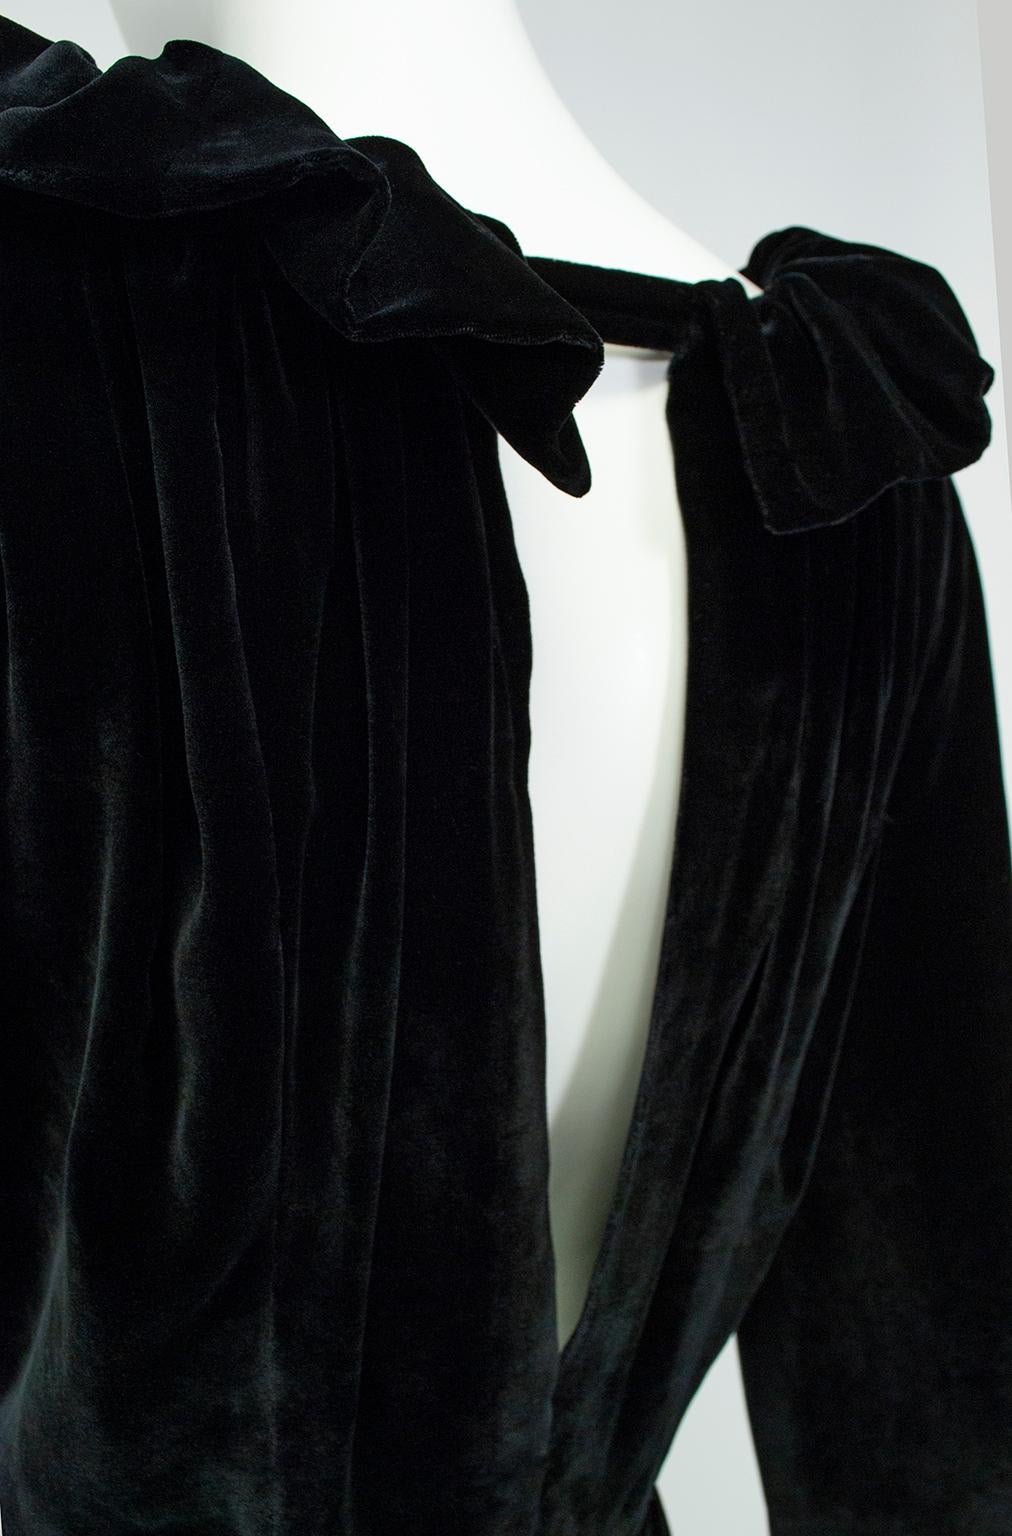 Aesthetic *Large Size* Black Velvet Ruff Collar Gown with Train - L-XL, 1930s 1